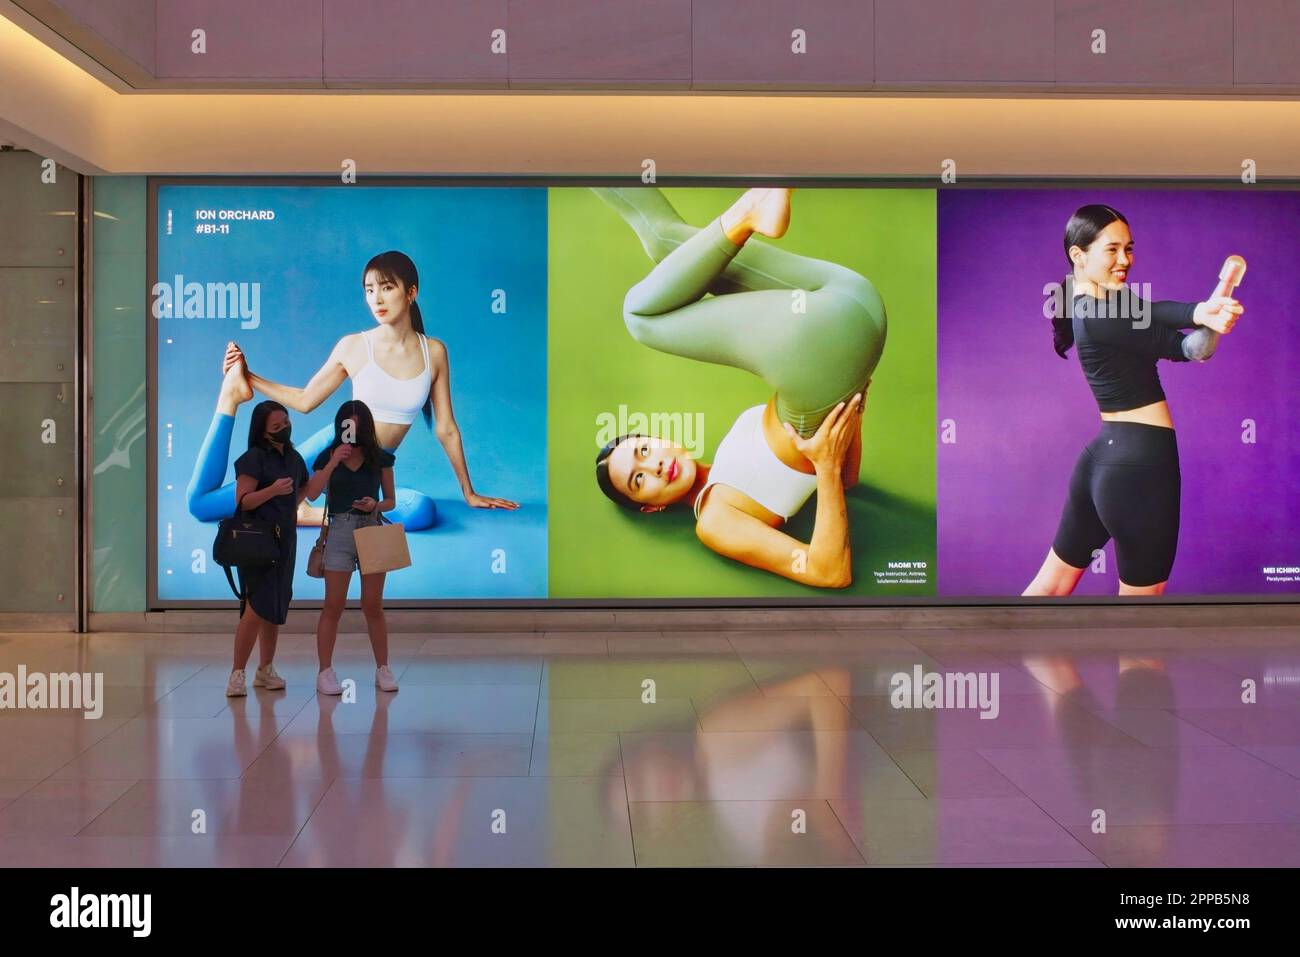 Shoppers at ION Orchard (mall) in Orchard Rd, Singapore pass in front of large yoga-themed advertisements for co. 'lululemon' selling athletic apparel Stock Photo